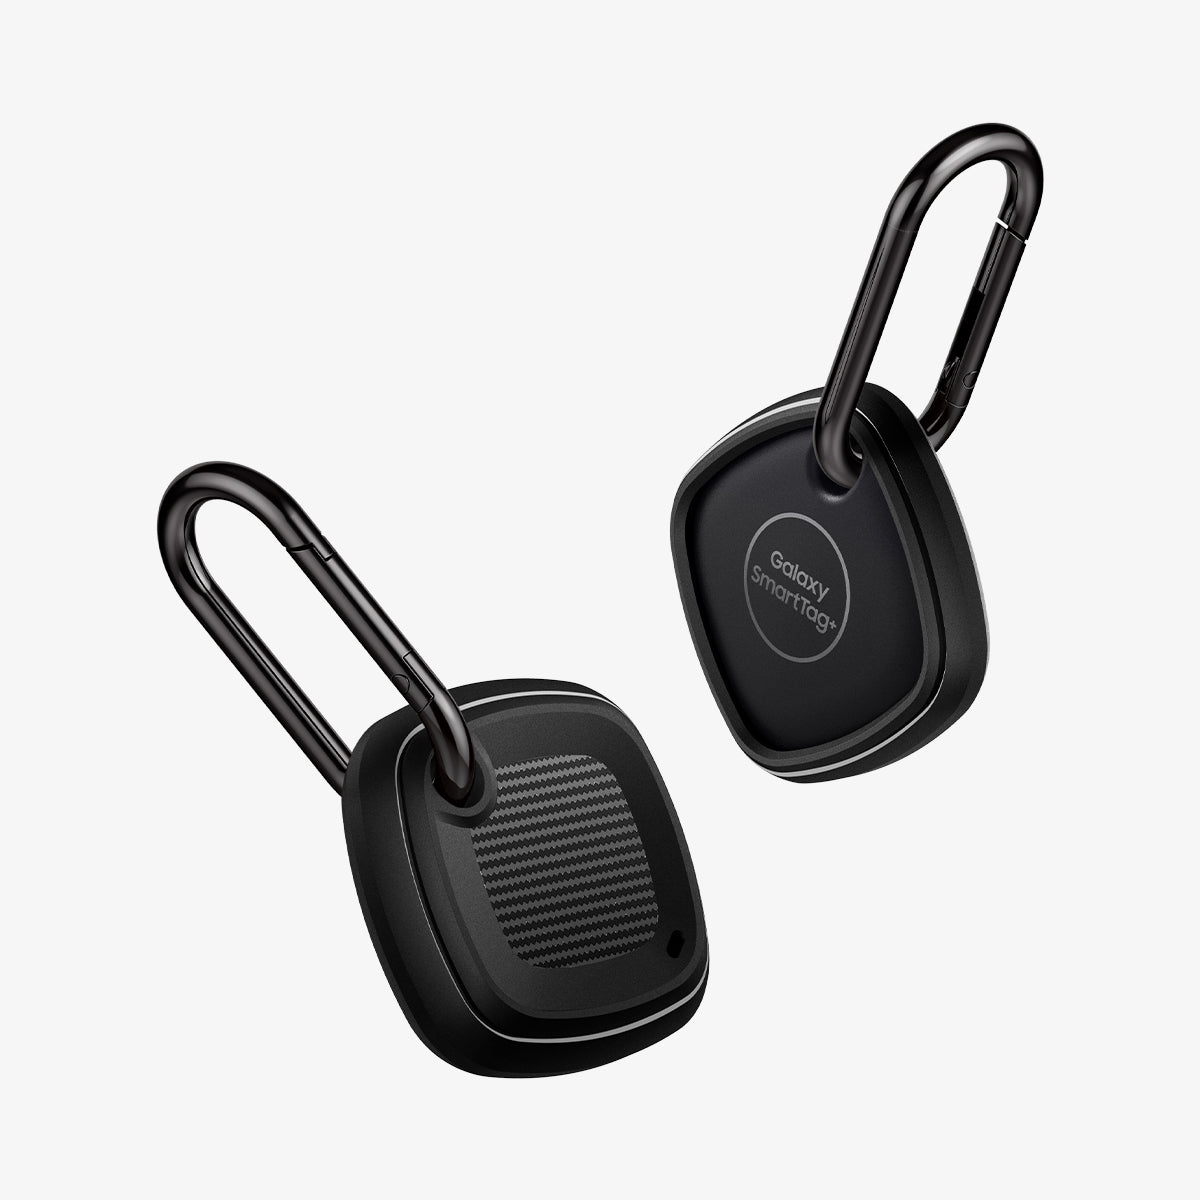 ACS03411 - Galaxy SmartTag+ Case Rugged Armor in matte black showing the front and back with carabiner